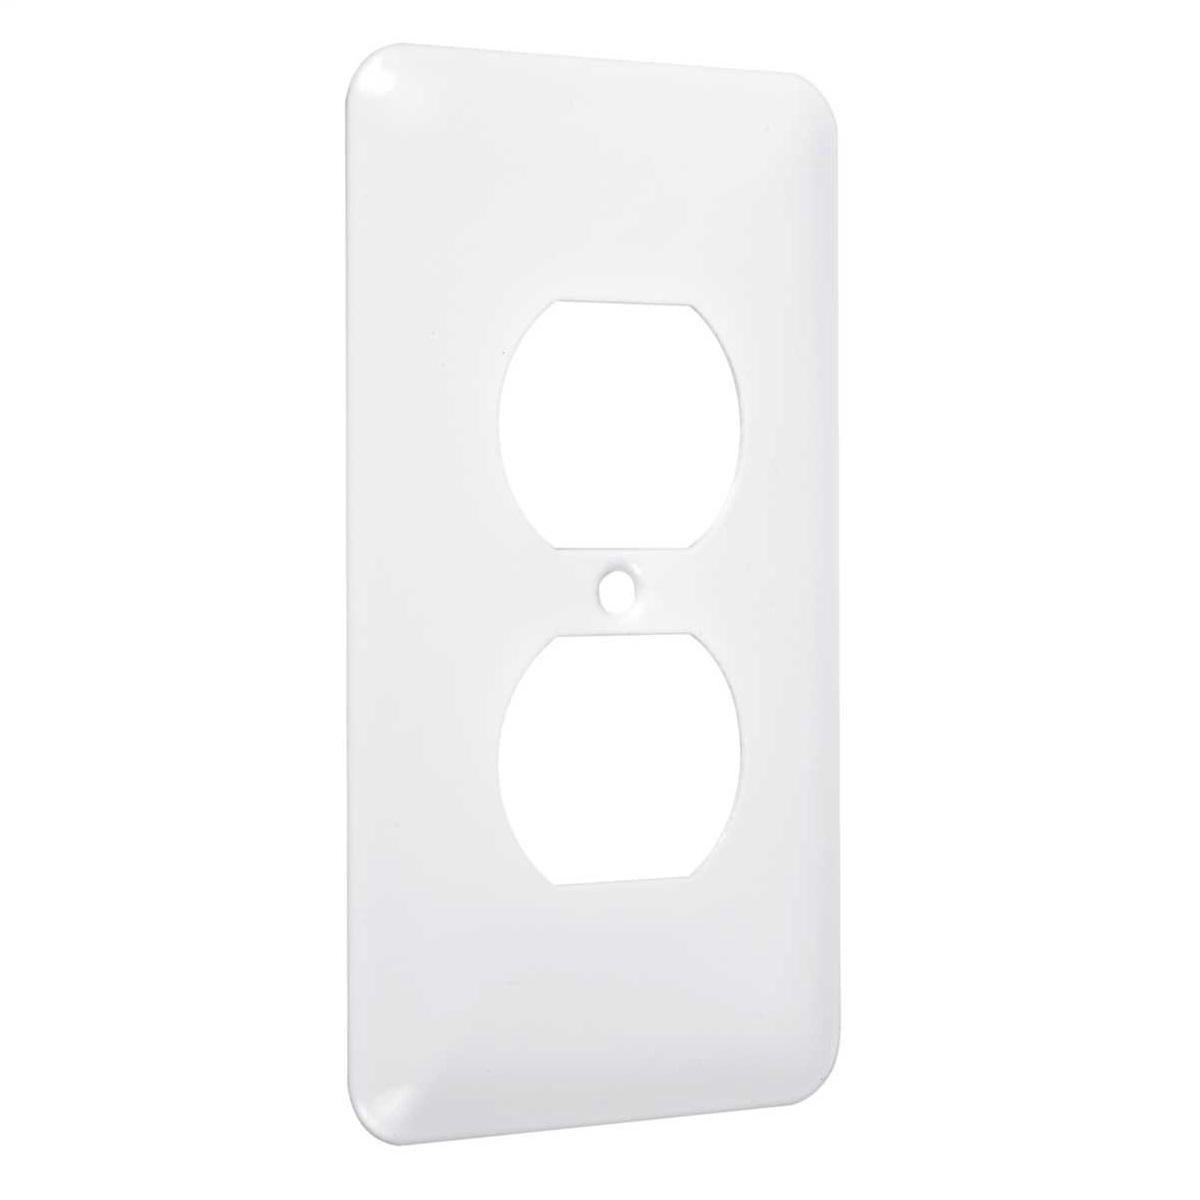 Hubbell WRW-D 1-Gang Metal Wallplate, Princess, Duplex, White Smooth  ; Easily primed and painted to match or complement walls. ; Won't bow, crack or distort during installation. ; Premium North American powder coat. ; Includes screw(s) in matching finish.